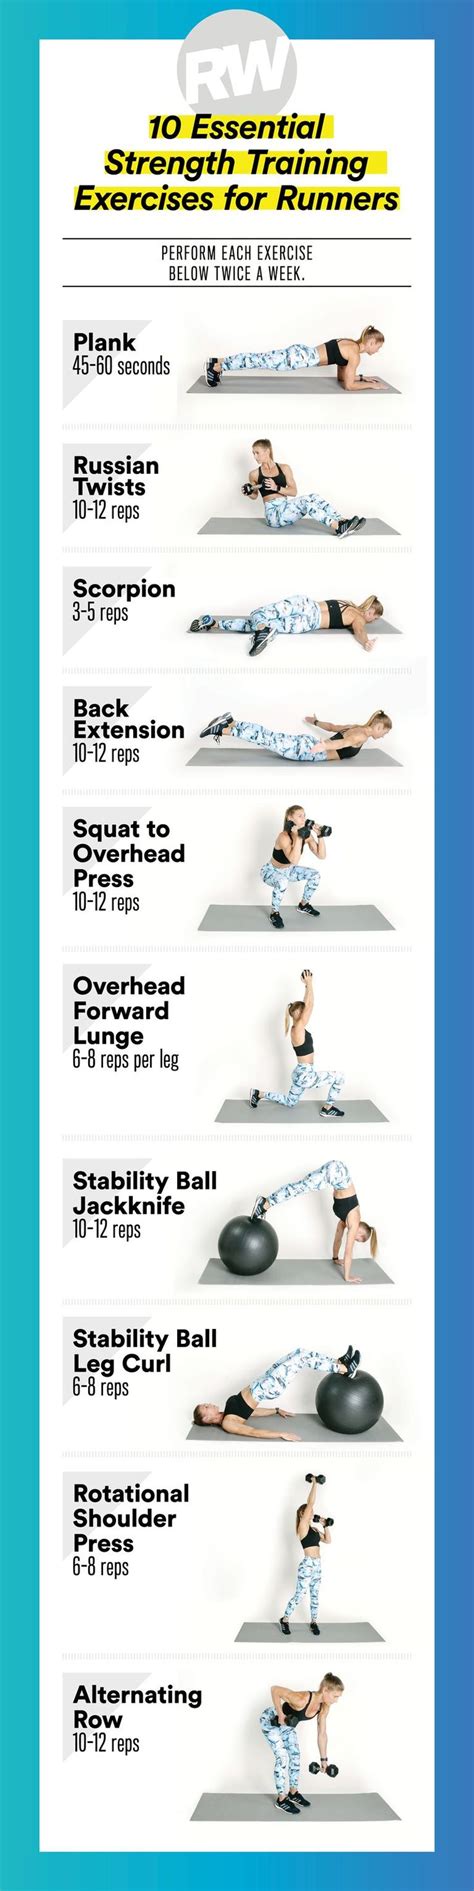 10 Essential Strength Training Exercises You Need To Add To Your